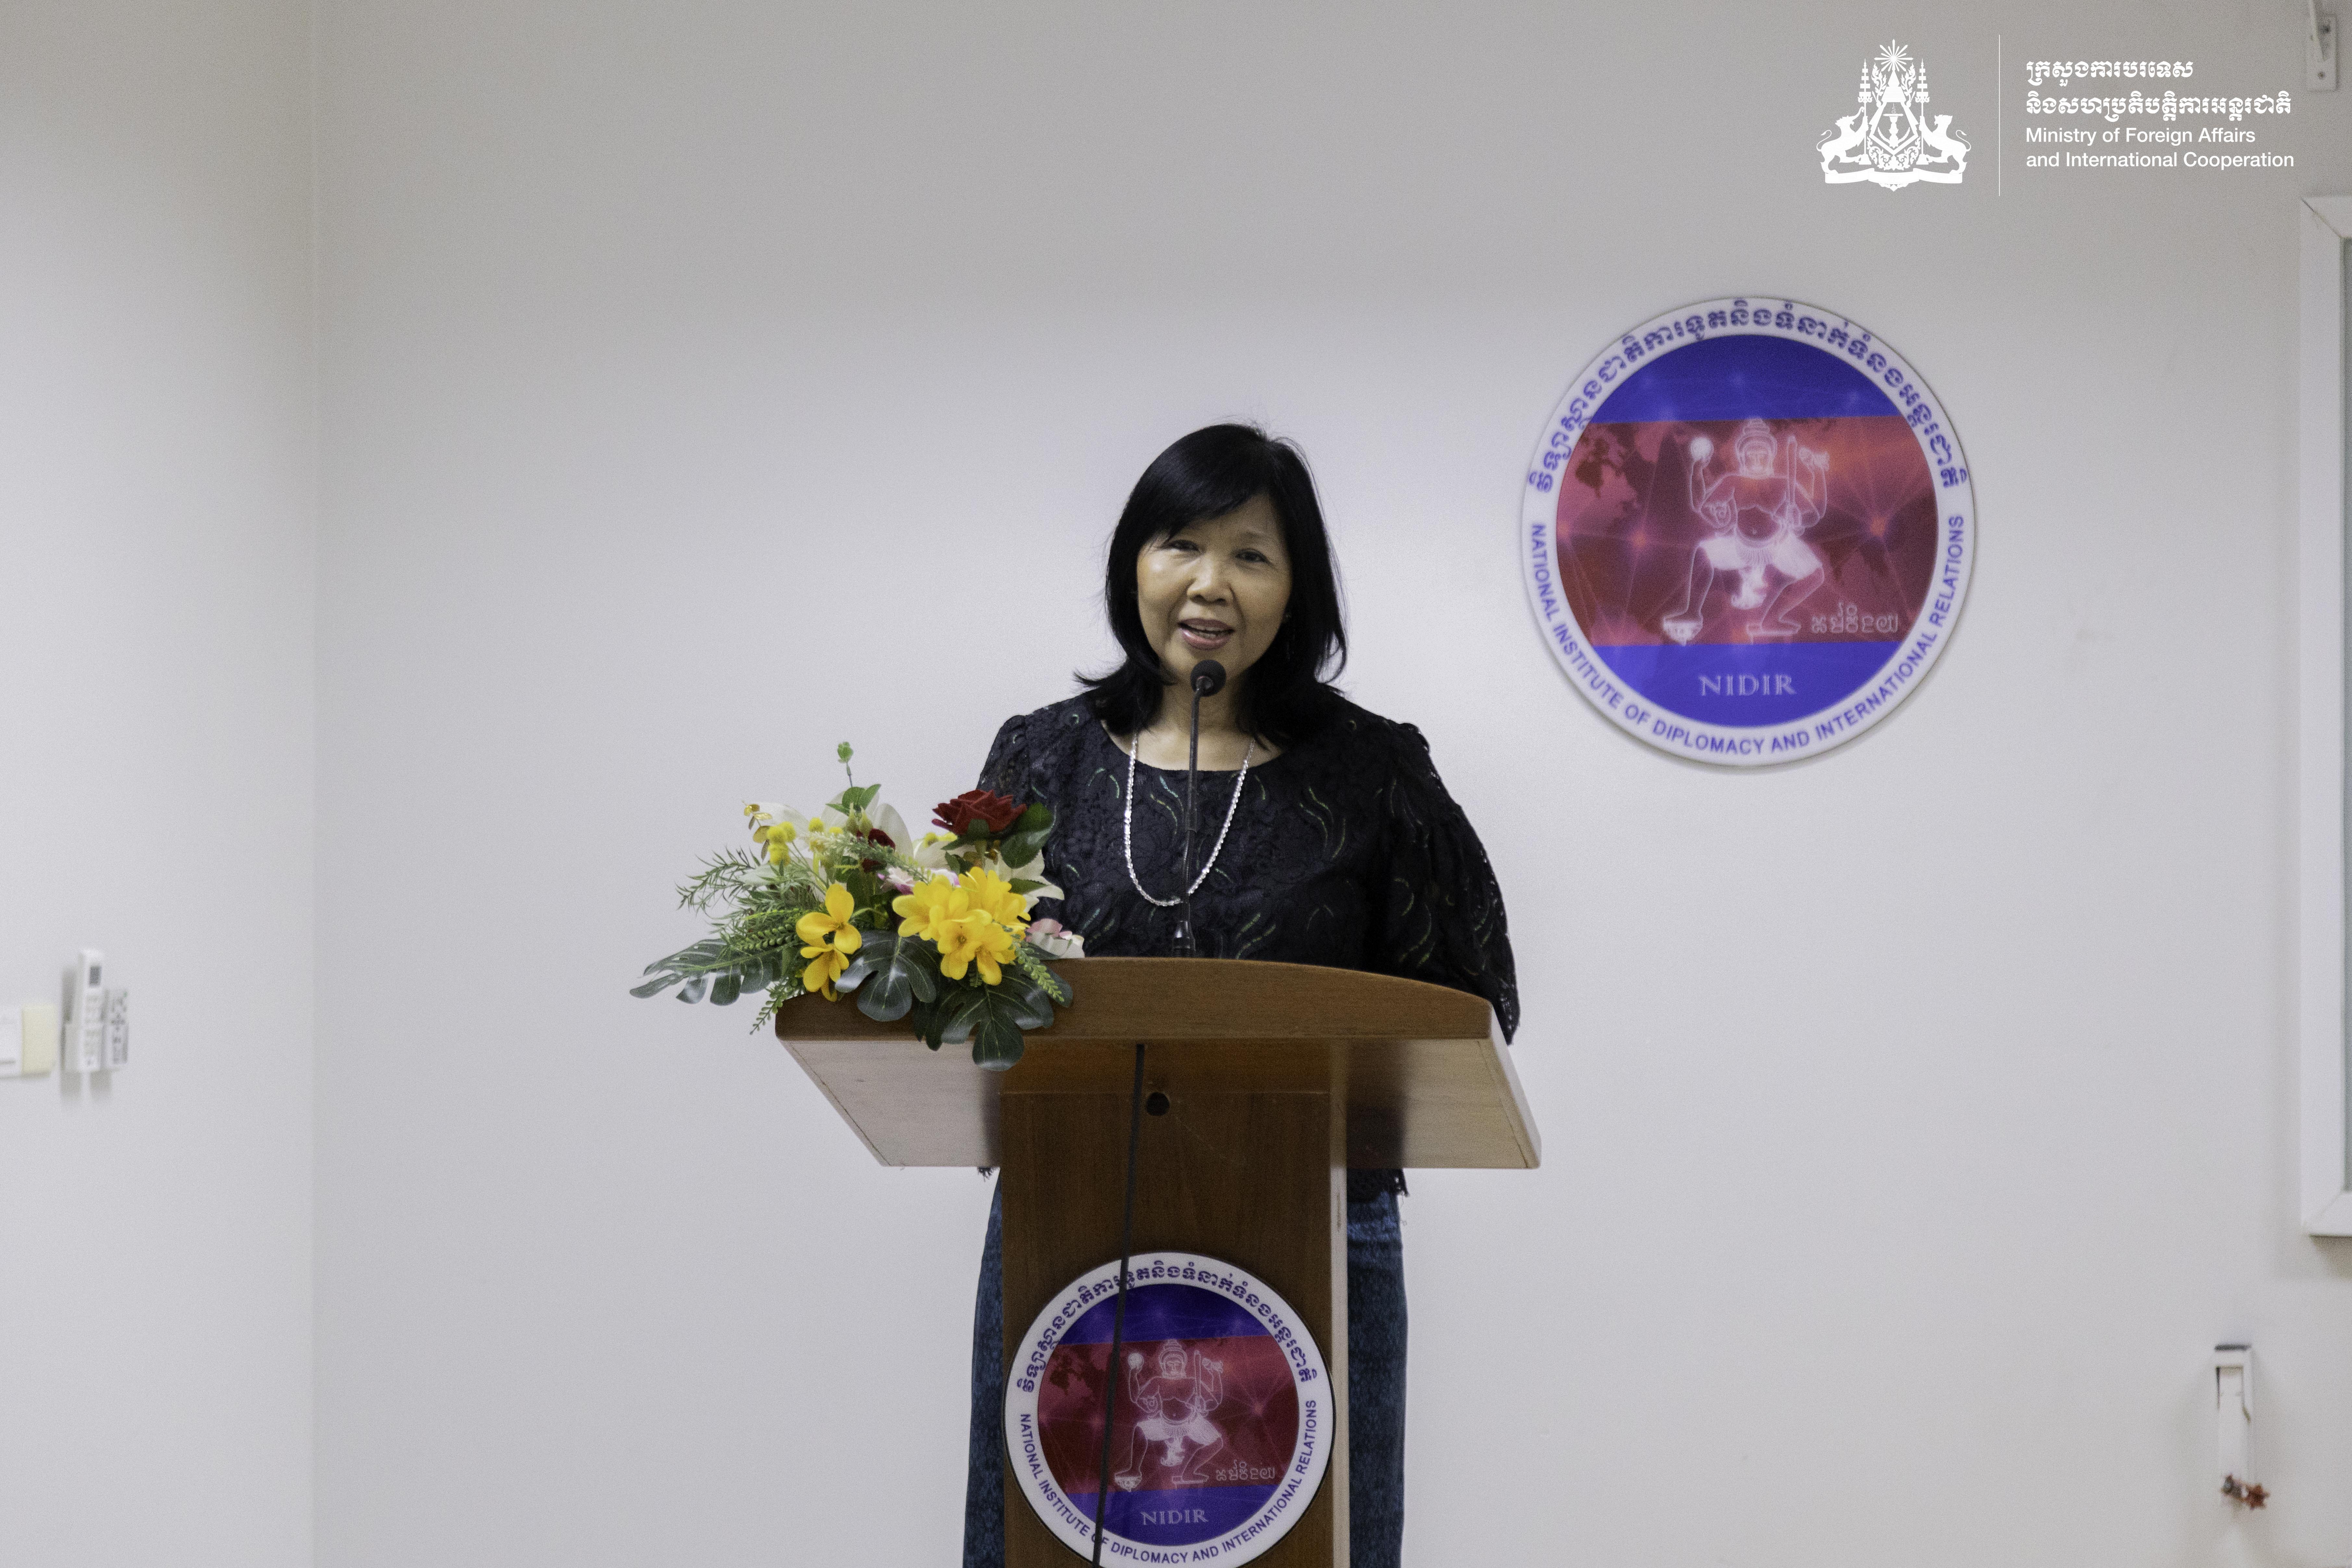 Her Excellency Eat Sophea, Secretary of State, Personal Adviser to Samdech Moha Borvor Thipadei HUN MANET, Prime Minister of the Kingdom of Cambodia, presided over the Closing Ceremony of the “Culinary Diplomacy Training Course”